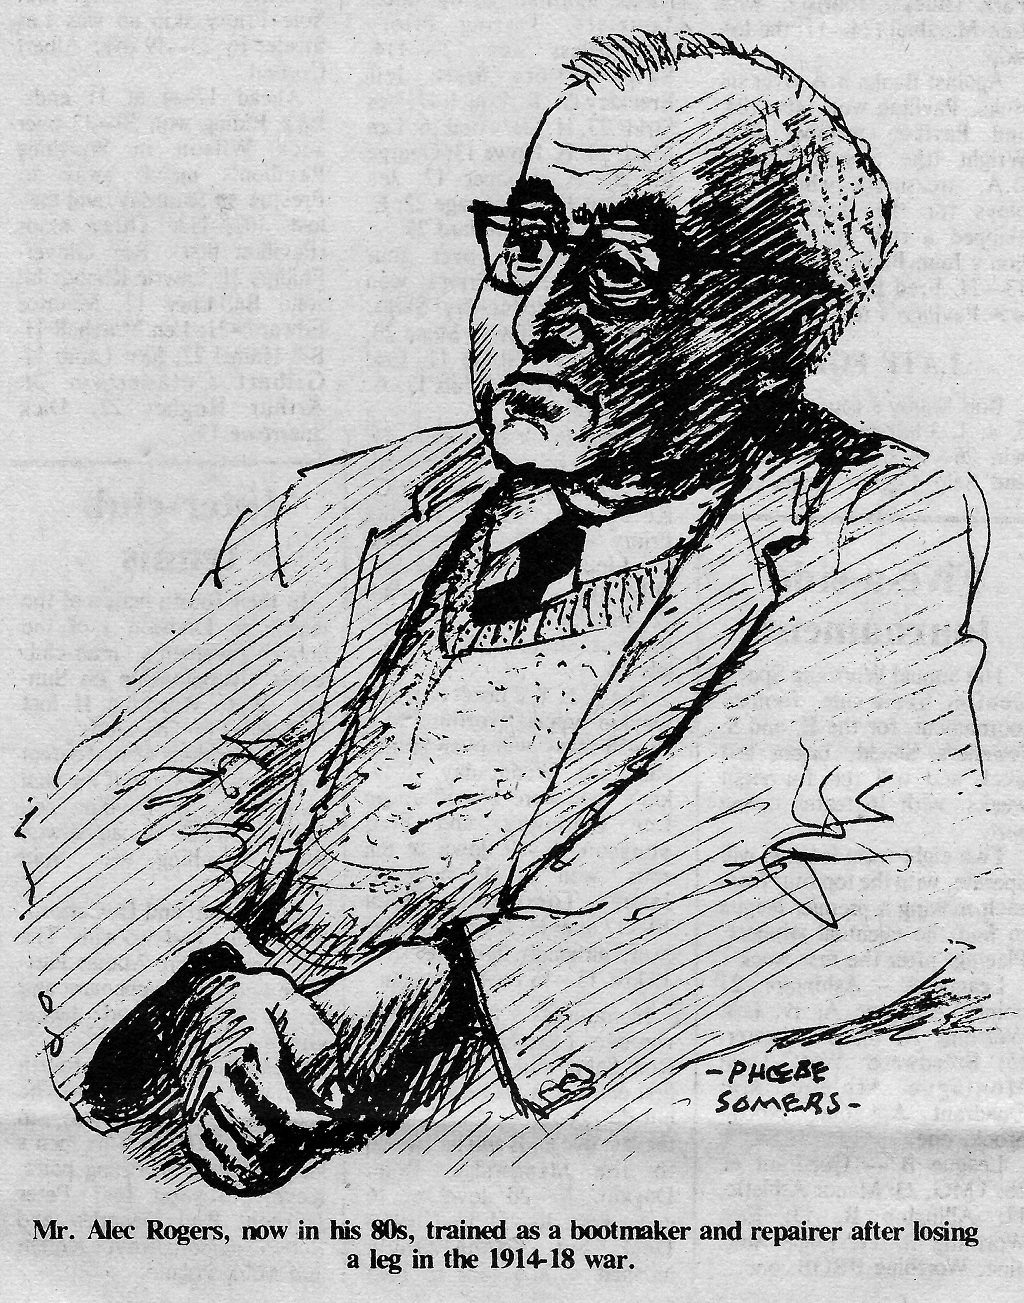 Drawing by Phoebe Somers, published in local newspaper about 1977